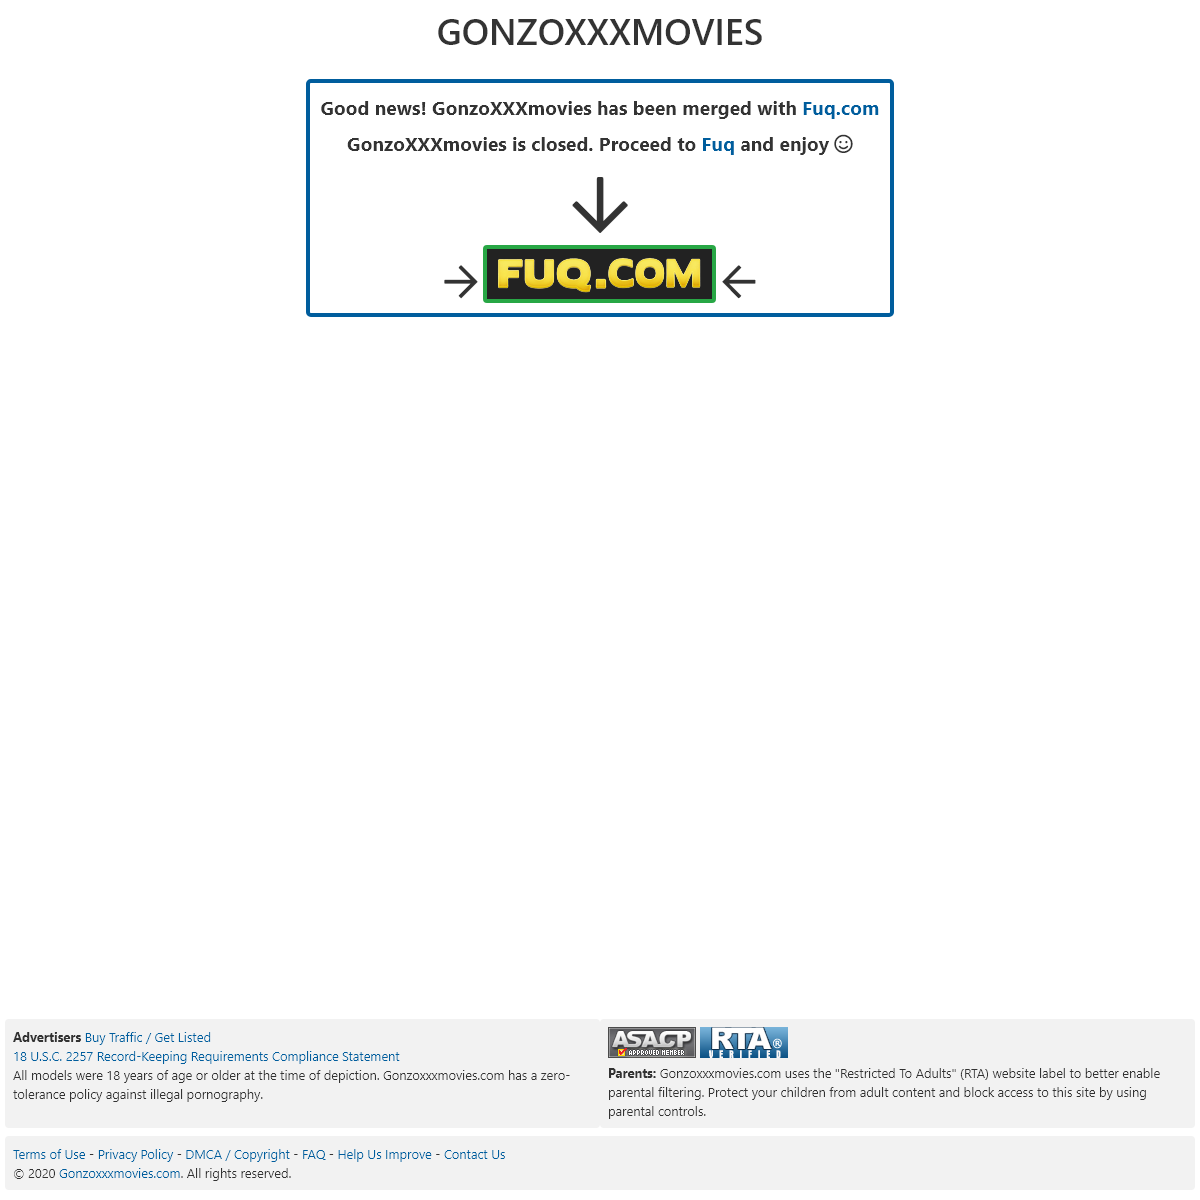 A complete backup of gonzoxxxmovies.com